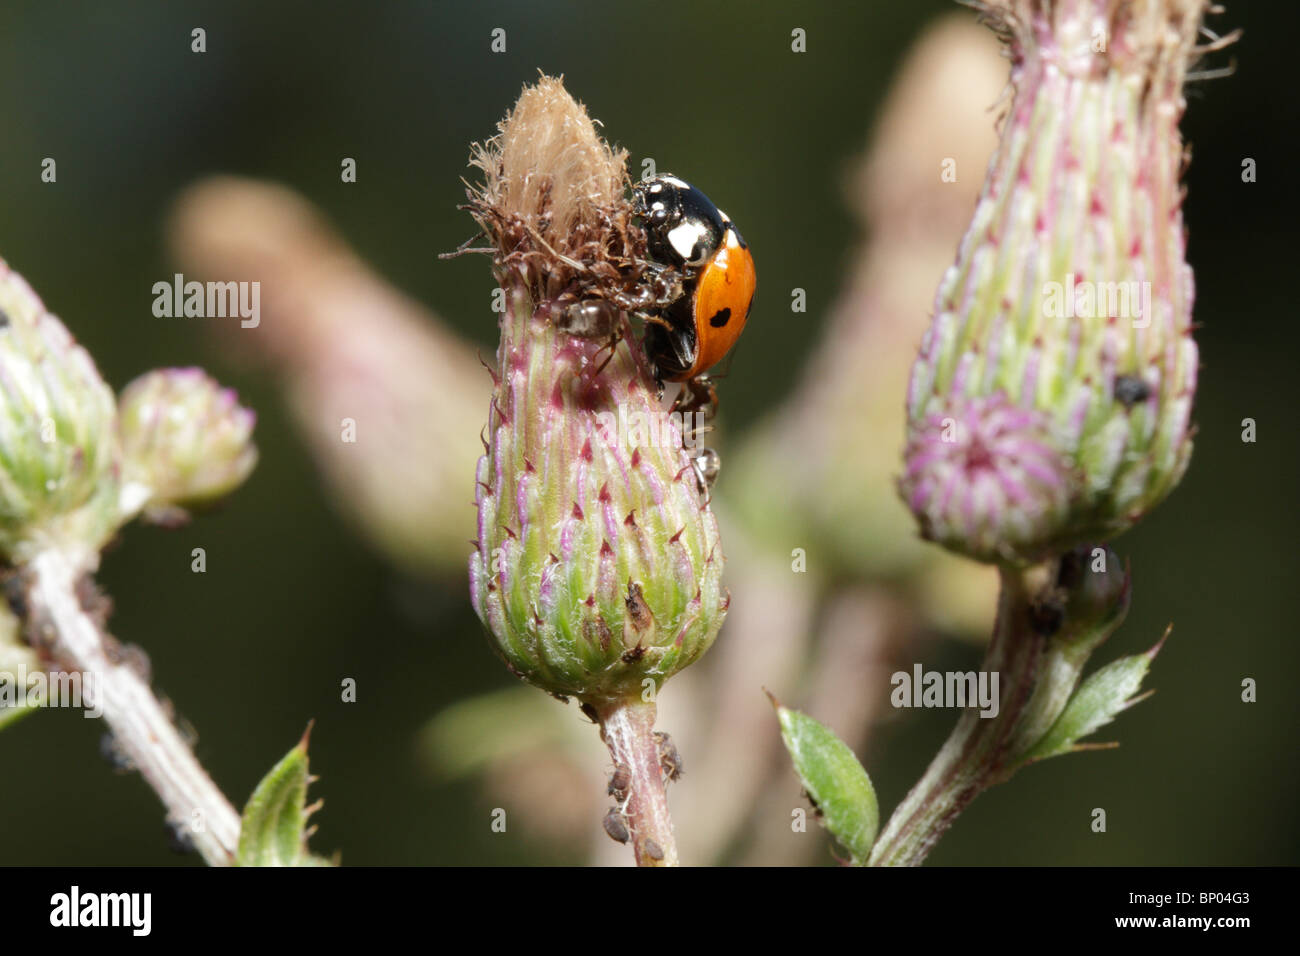 Seven-spotted lady beetle, attacked by Black Garden Ants (Lasius niger) on a thistle. The ants protect their aphids. Stock Photo